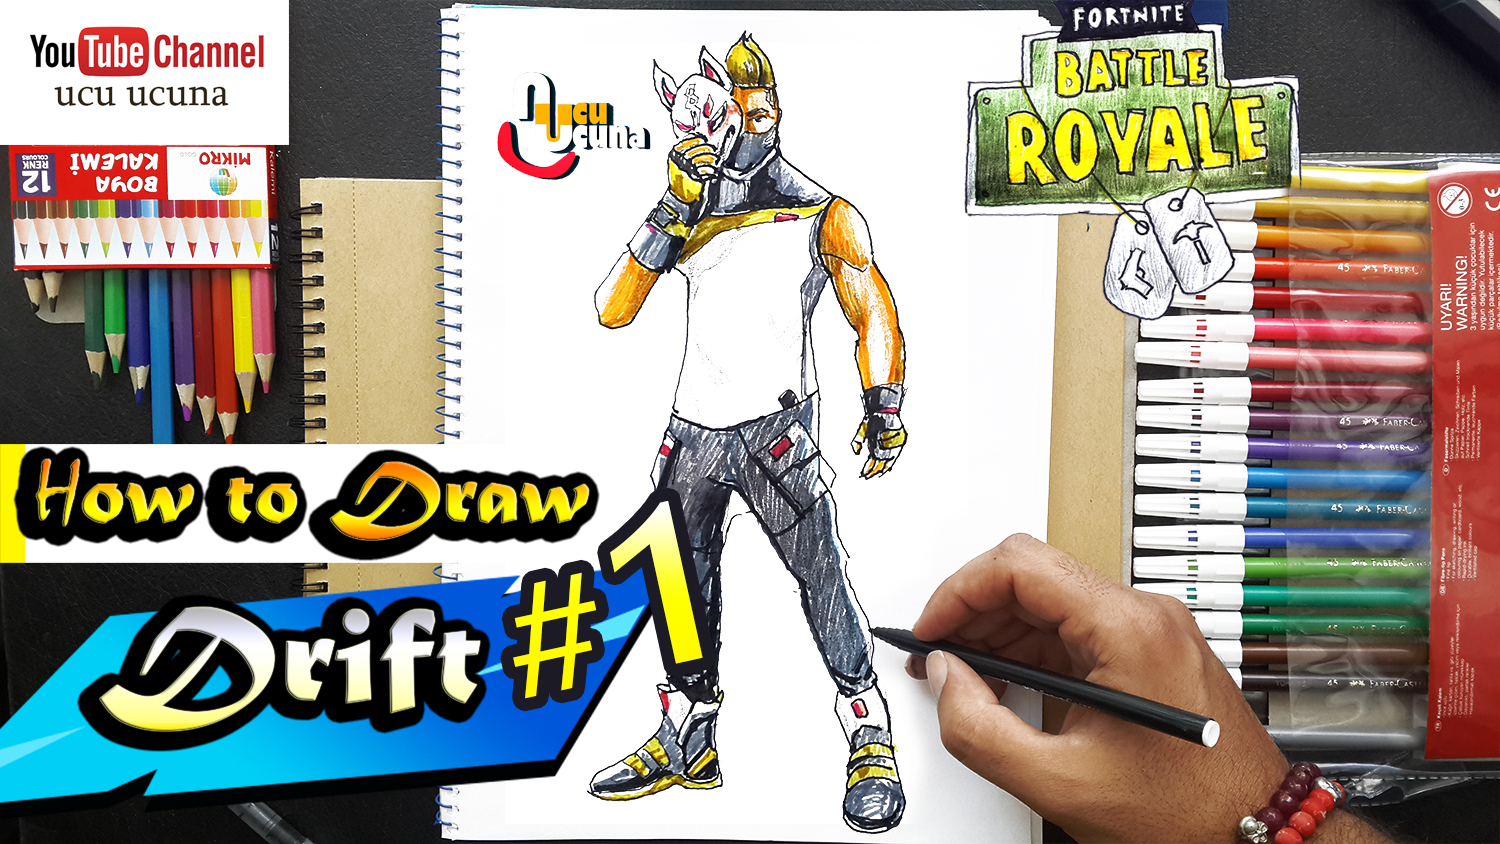 How to draw drift tutorial youtube channel name is ucu ucuna learn how to draw drift skin from fortnite step by step beginner drawing tutorial of the drift skin from fortnite